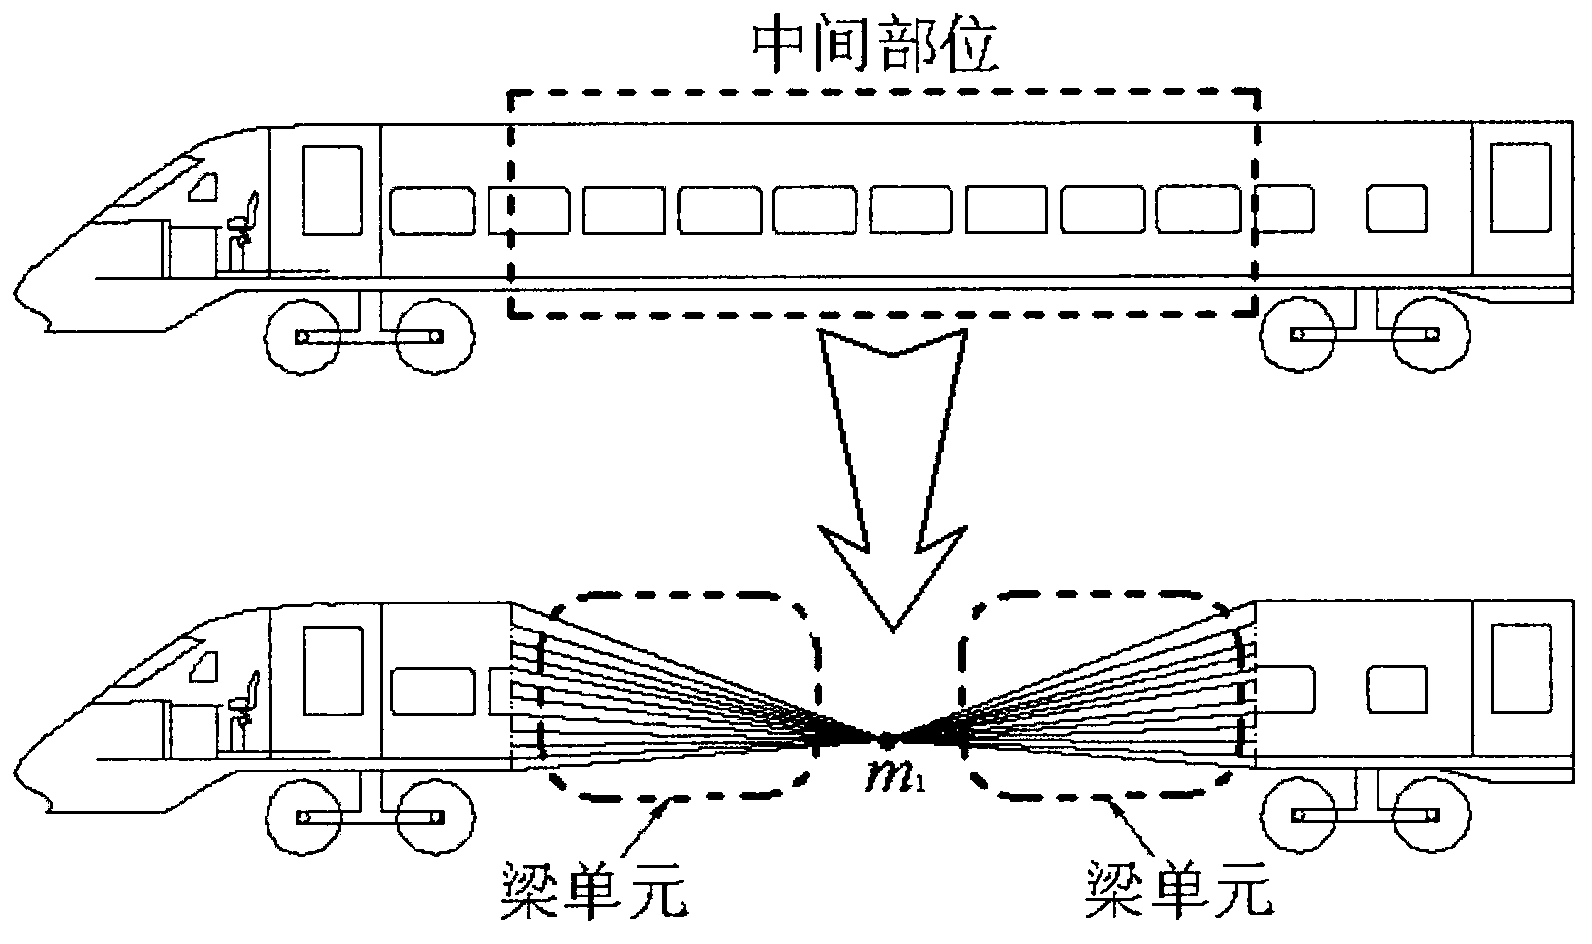 Method of simplifying model of collision simulation for multiple railway trains